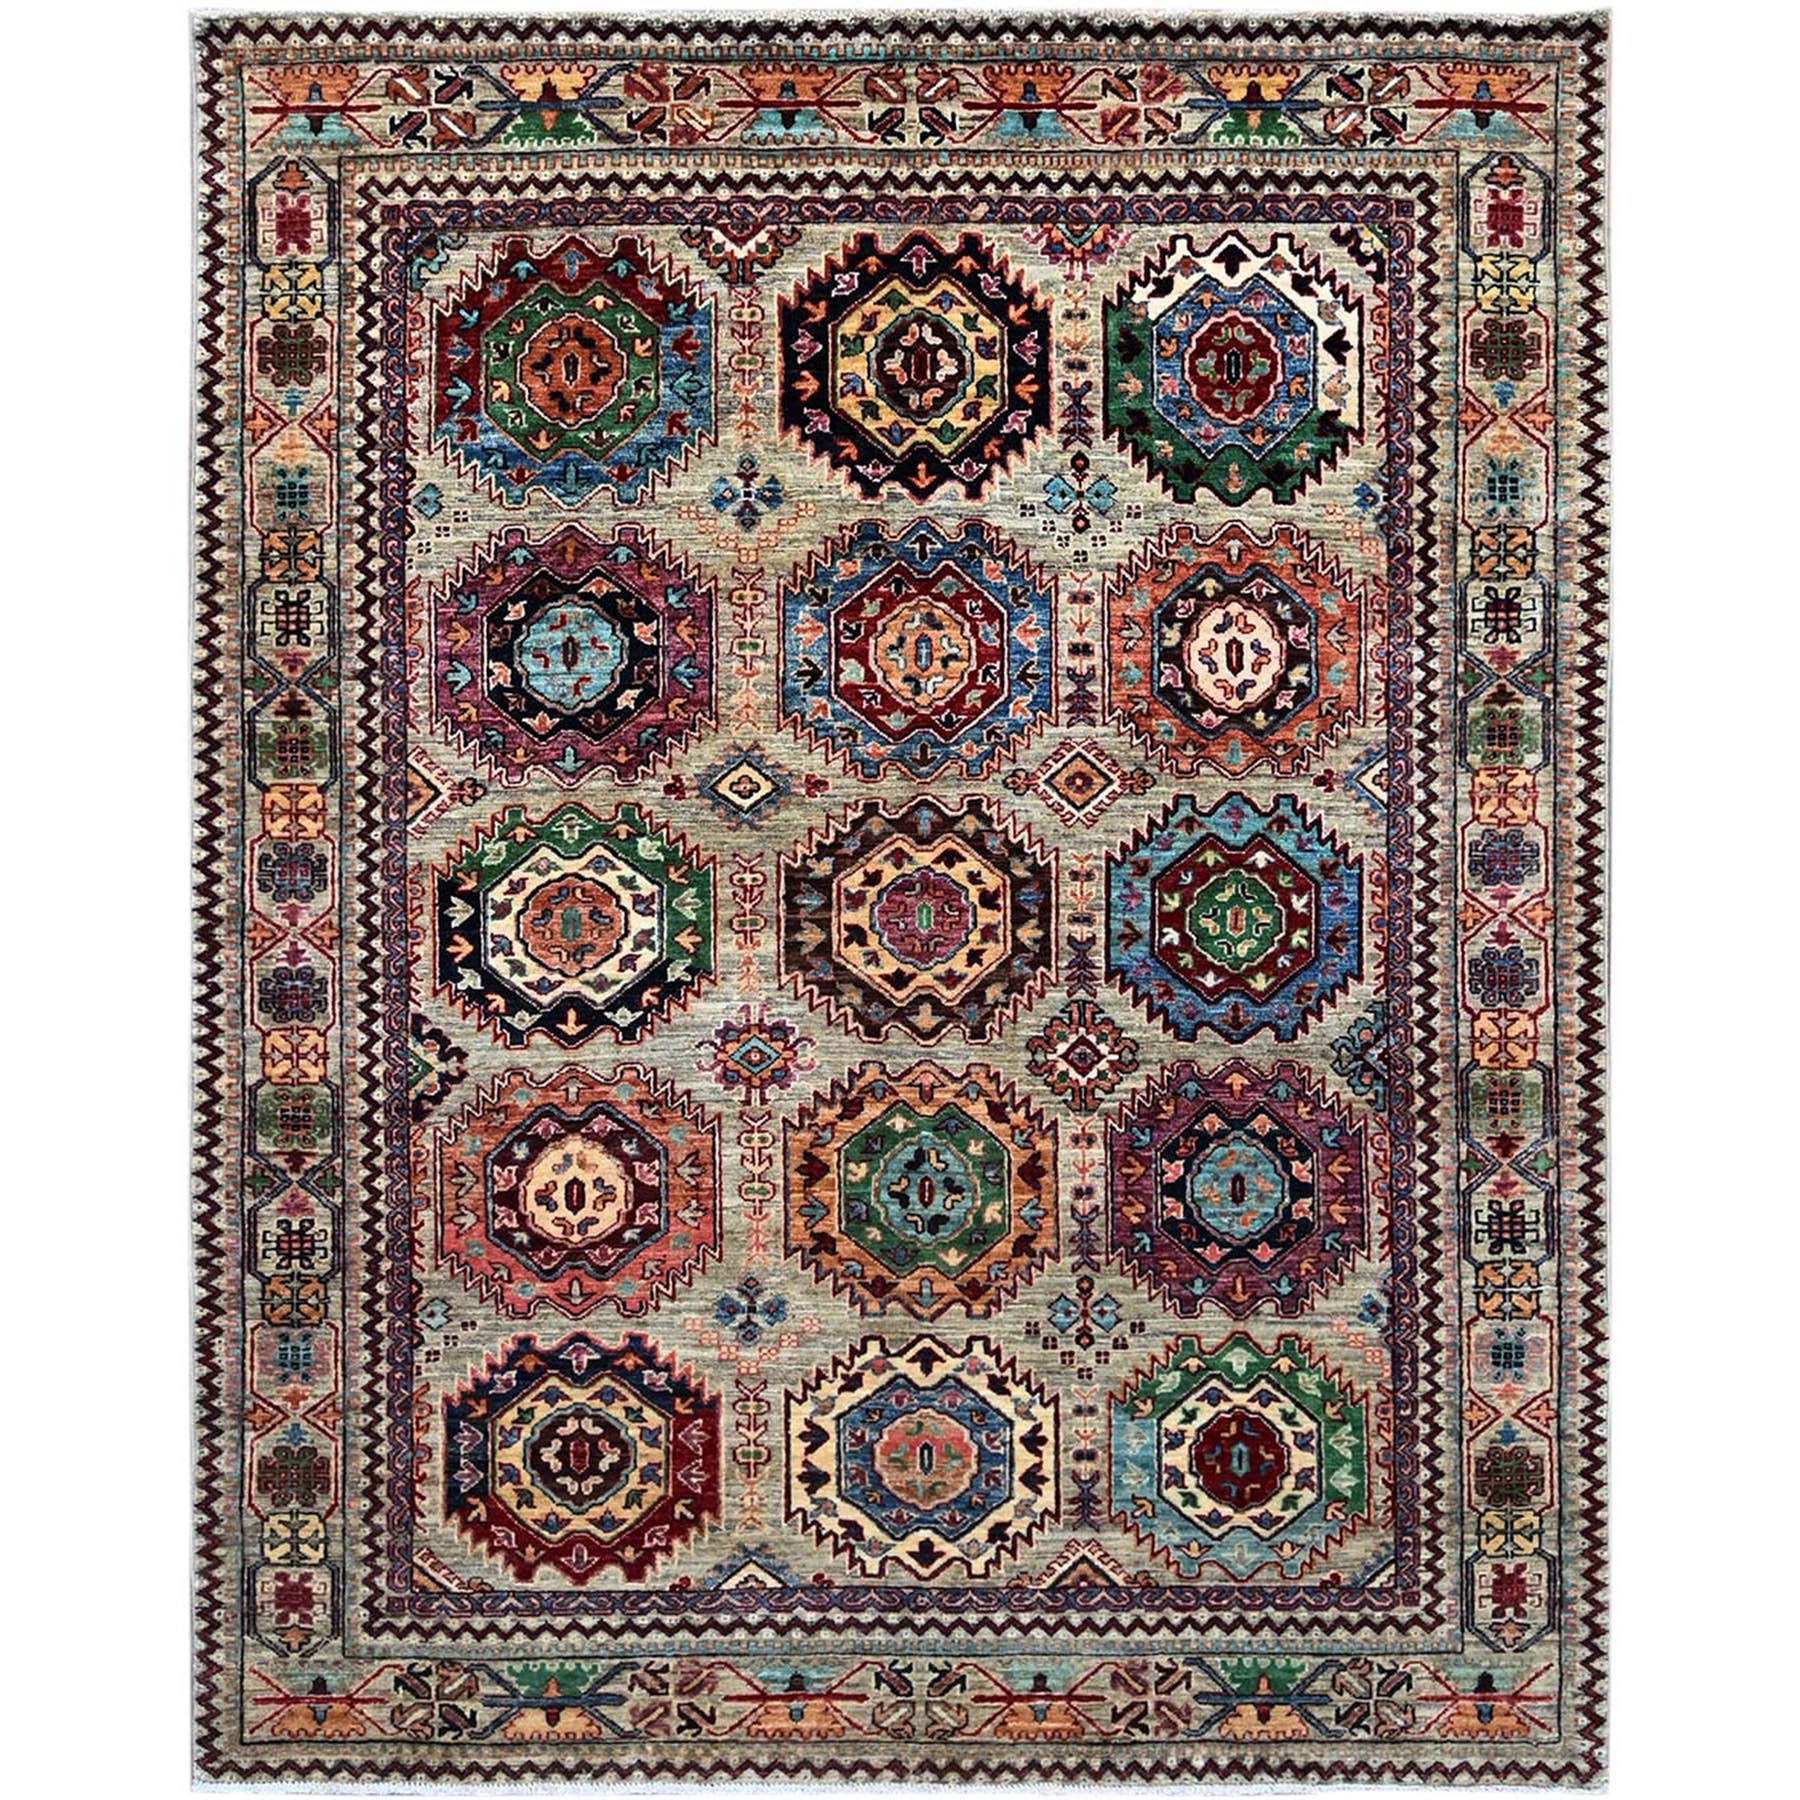 Pearl Gray, Afghan Denser Weave Super Kazak with Geometric Design Vibrant Wool, Hand Knotted Natural Dyes, Oriental Rug